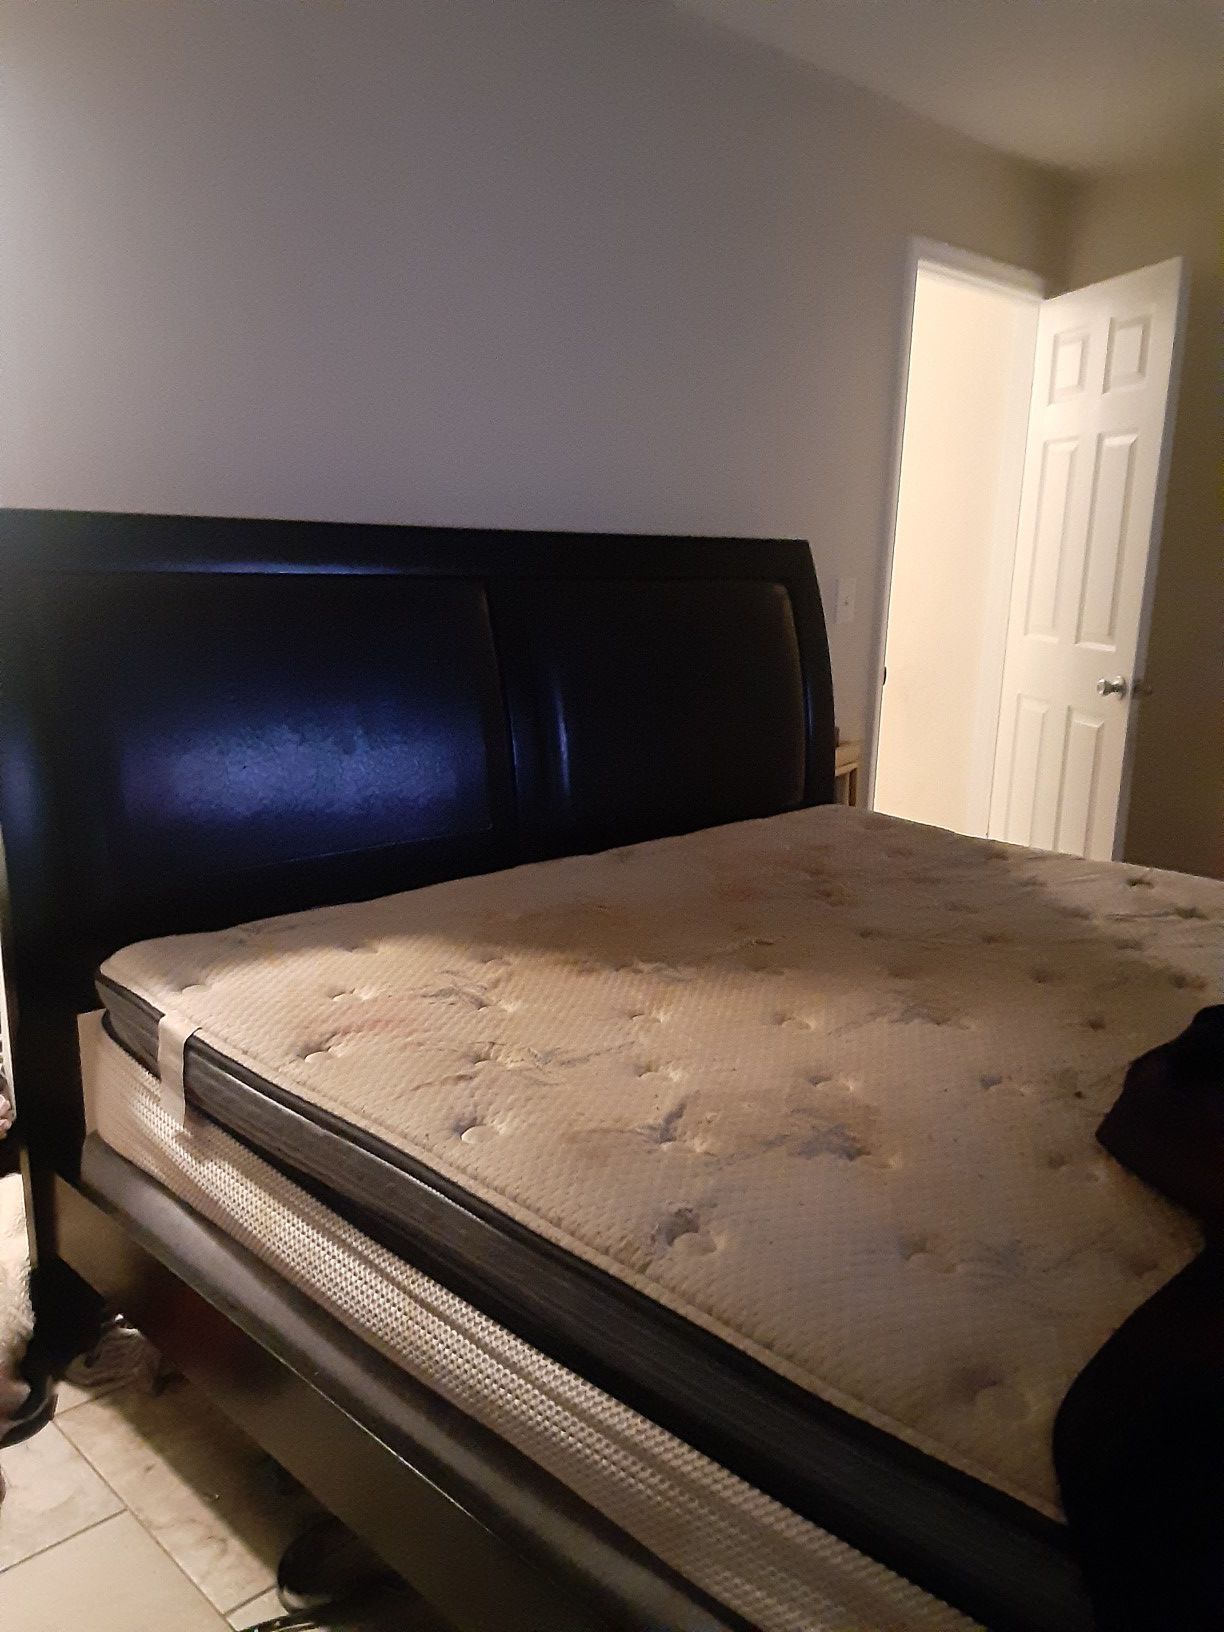 Used cali king bed moving and need gone by Friday